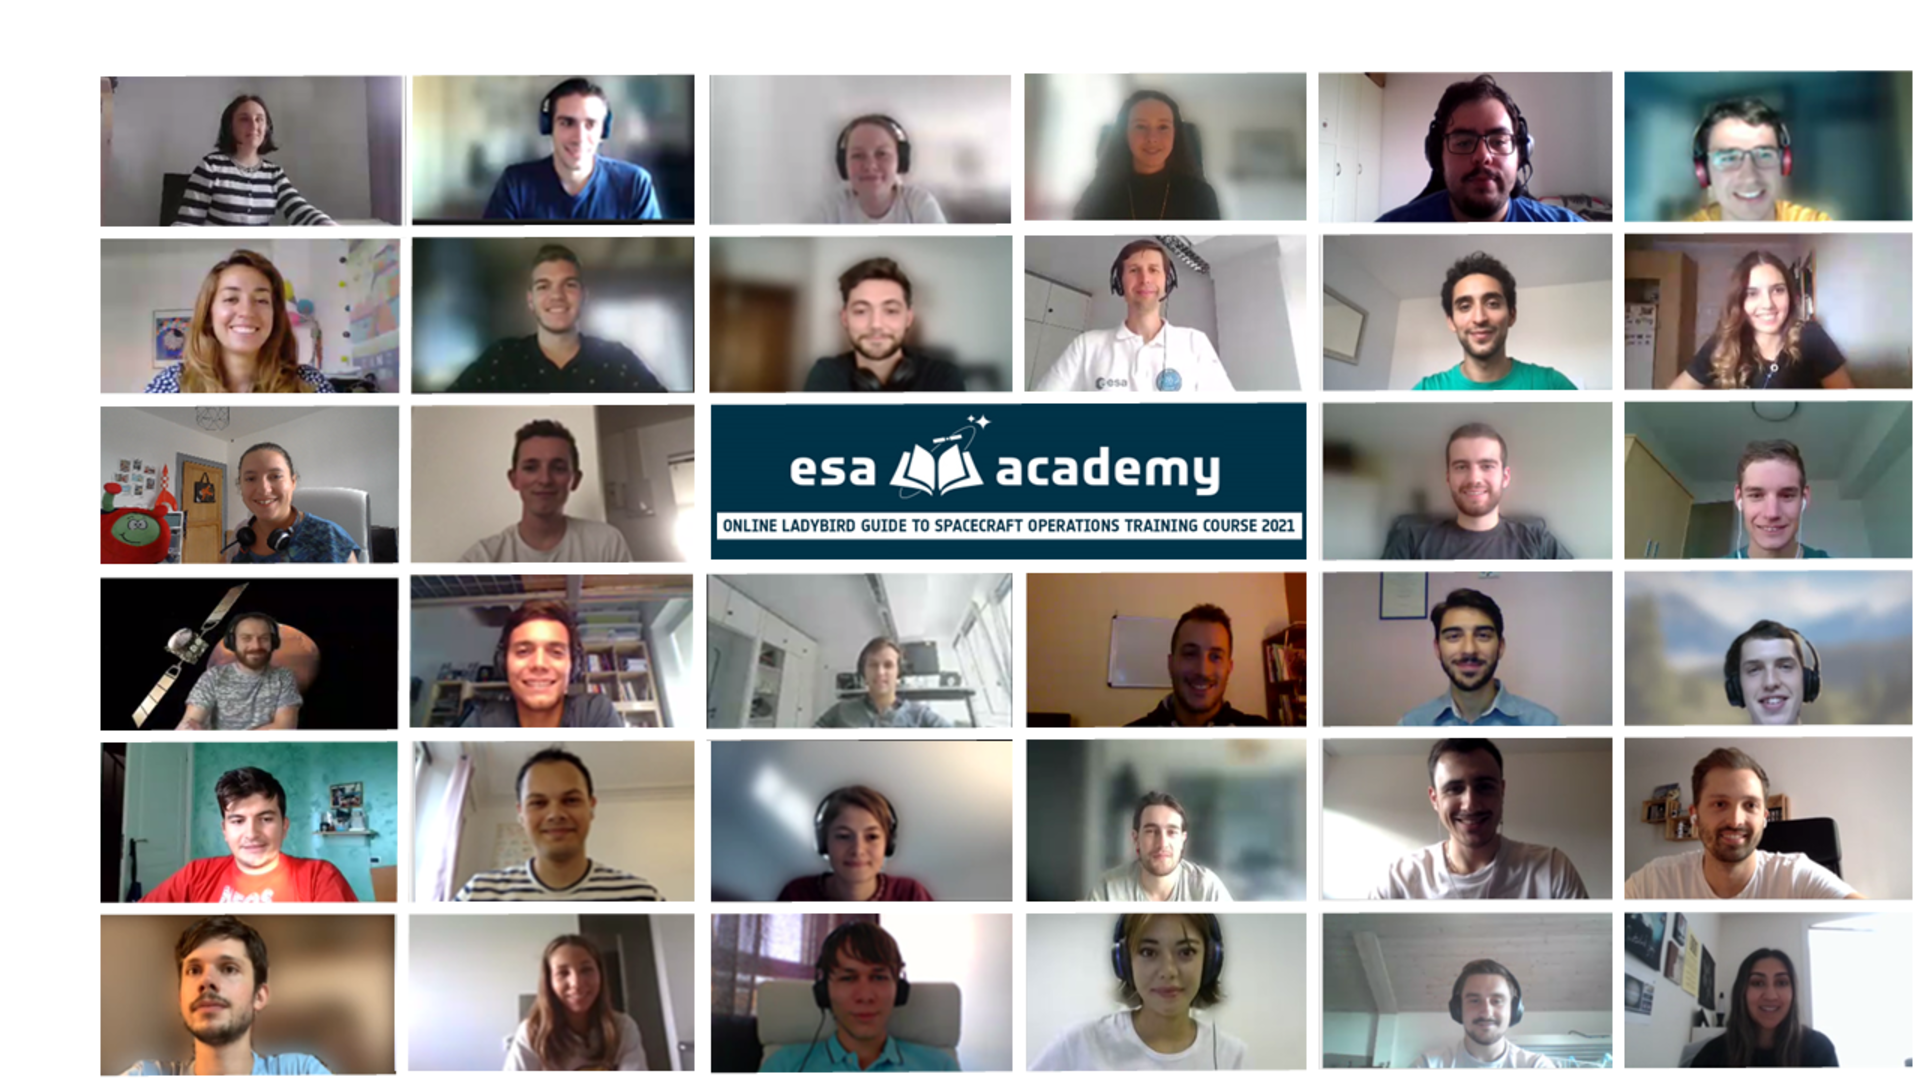 Group picture of the ESA Academy Online Ladybird Guide to Spacecraft Operations Training Course 2021